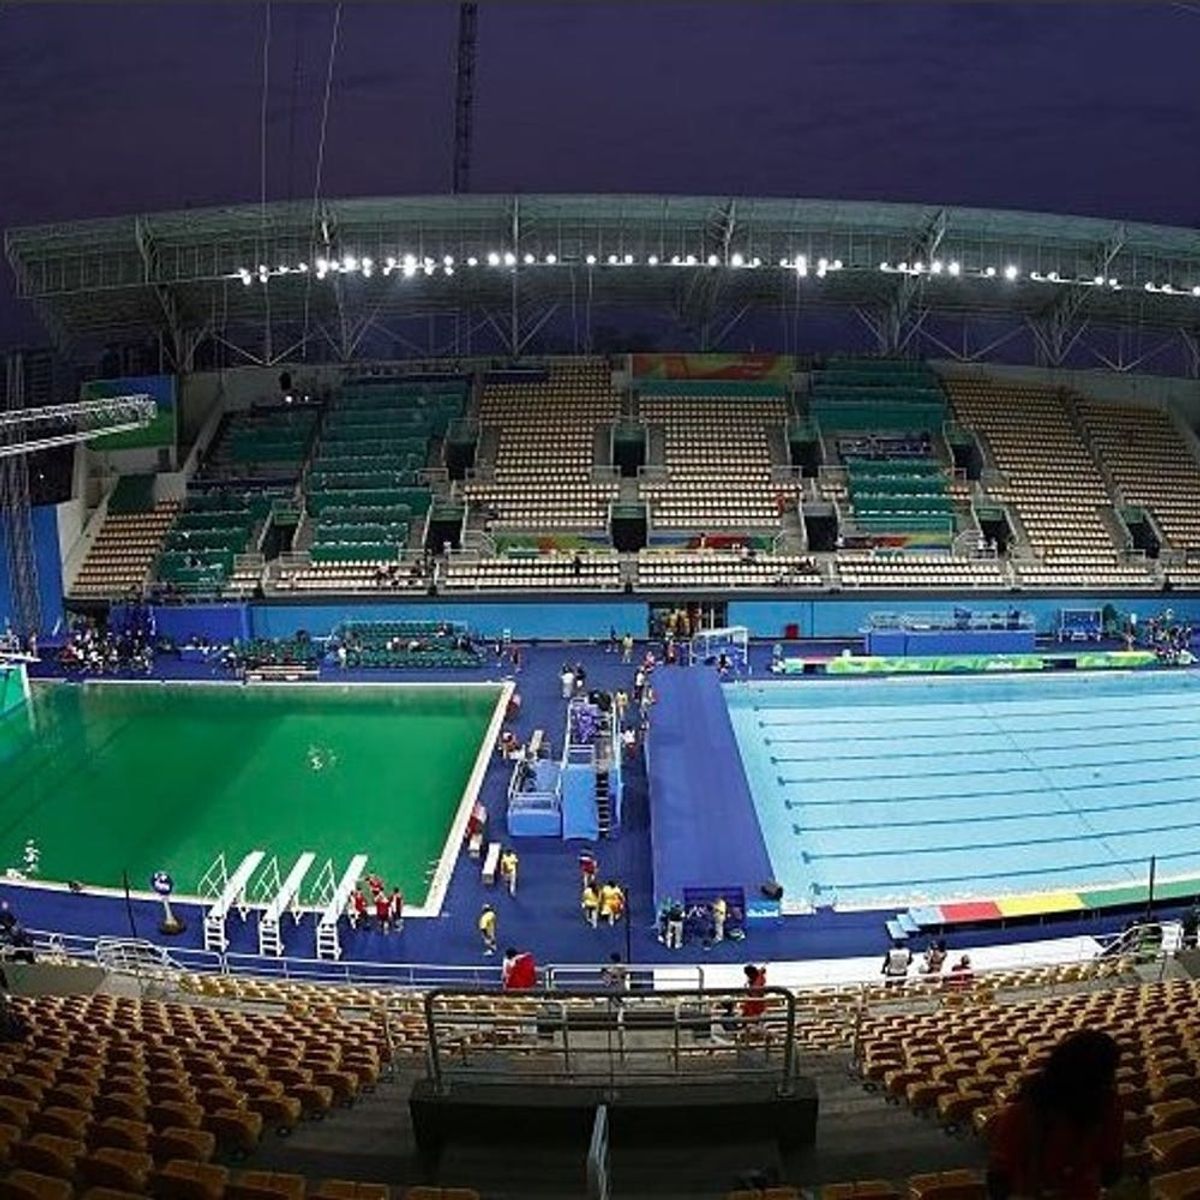 For the Record: Science Says There’s No Way Pee Is Behind the Olympic Pool Greening AT ALL